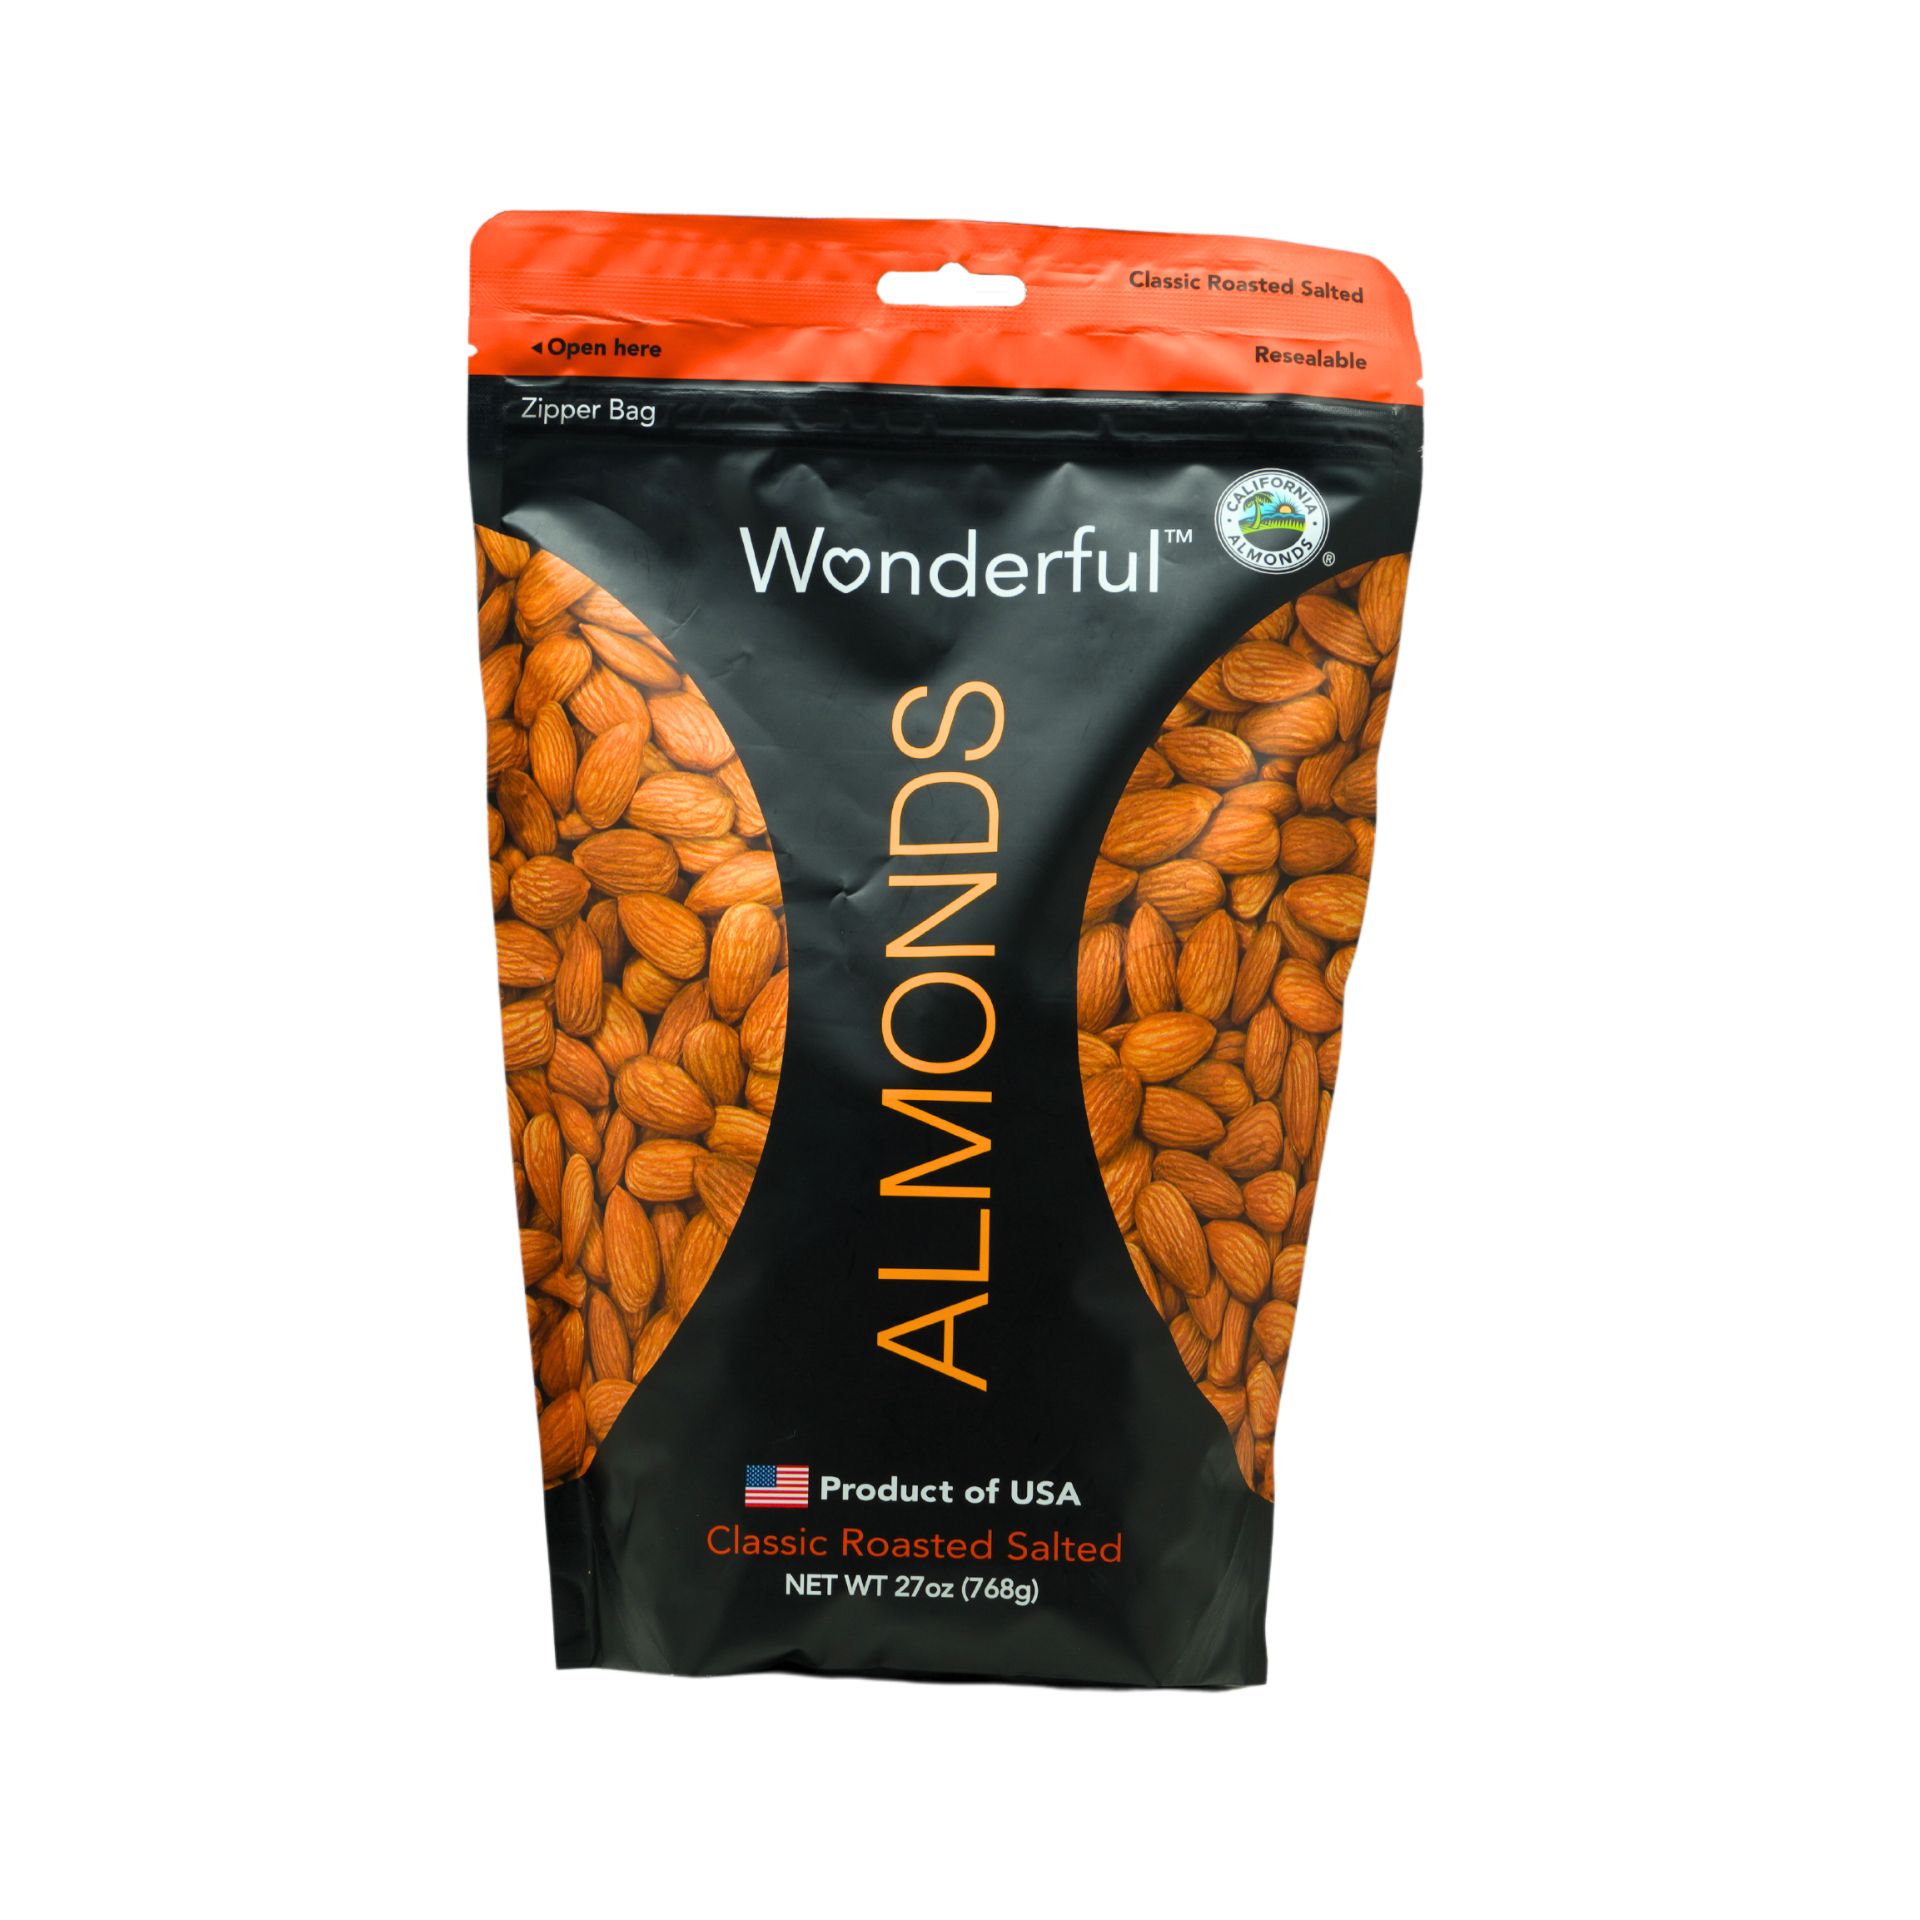 Wonderful Classic Roasted Salted Almonds (768g)